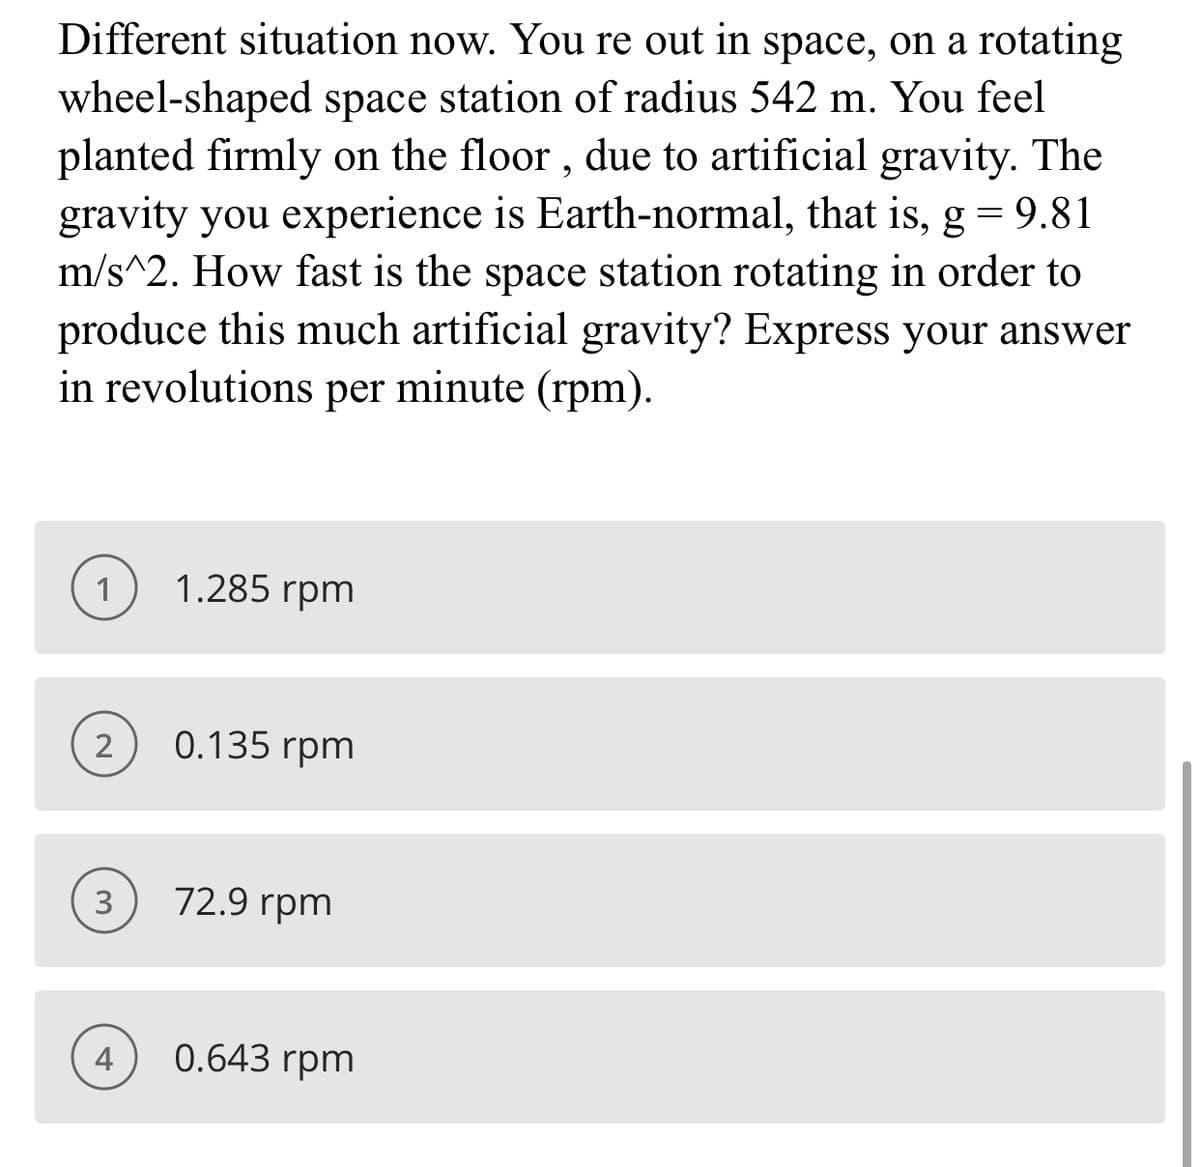 Different situation now. You re out in space, on a rotating
wheel-shaped space station of radius 542 m. You feel
planted firmly on the floor , due to artificial gravity. The
gravity you experience is Earth-normal, that is, g = 9.81
m/s^2. How fast is the space station rotating in order to
produce this much artificial gravity? Express your answer
in revolutions per minute (rpm).
1
1.285 rpm
2
0.135 rpm
3
72.9 rpm
4
0.643 rpm
